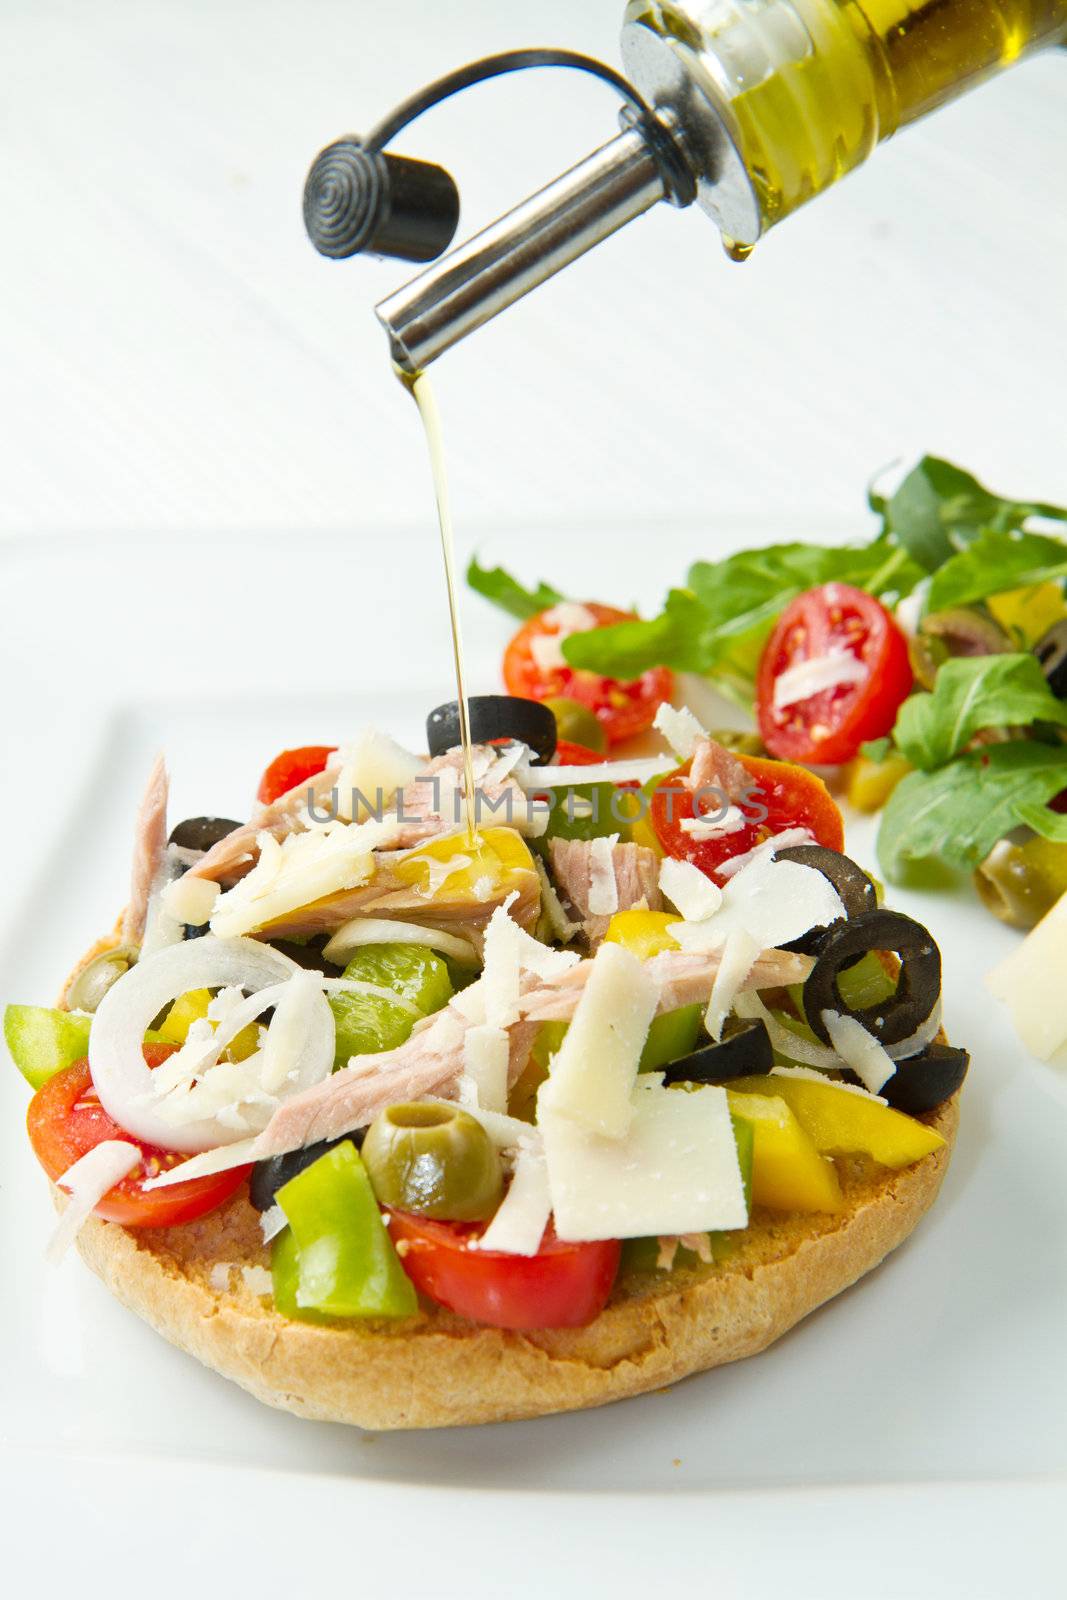 frisella with vegetables and tuna